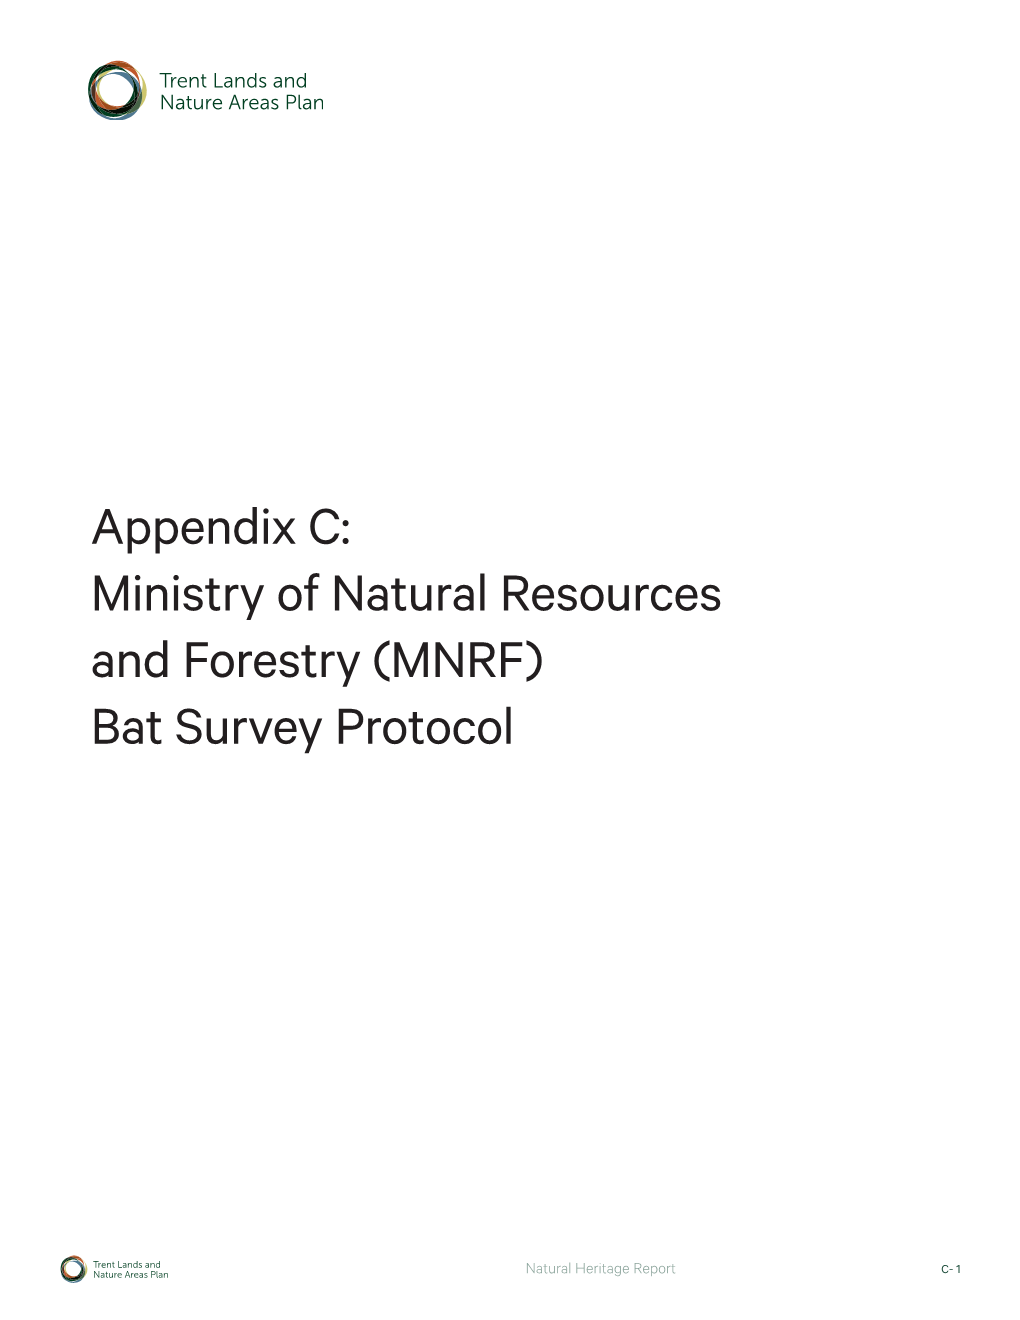 Natural Heritage Report Appendices